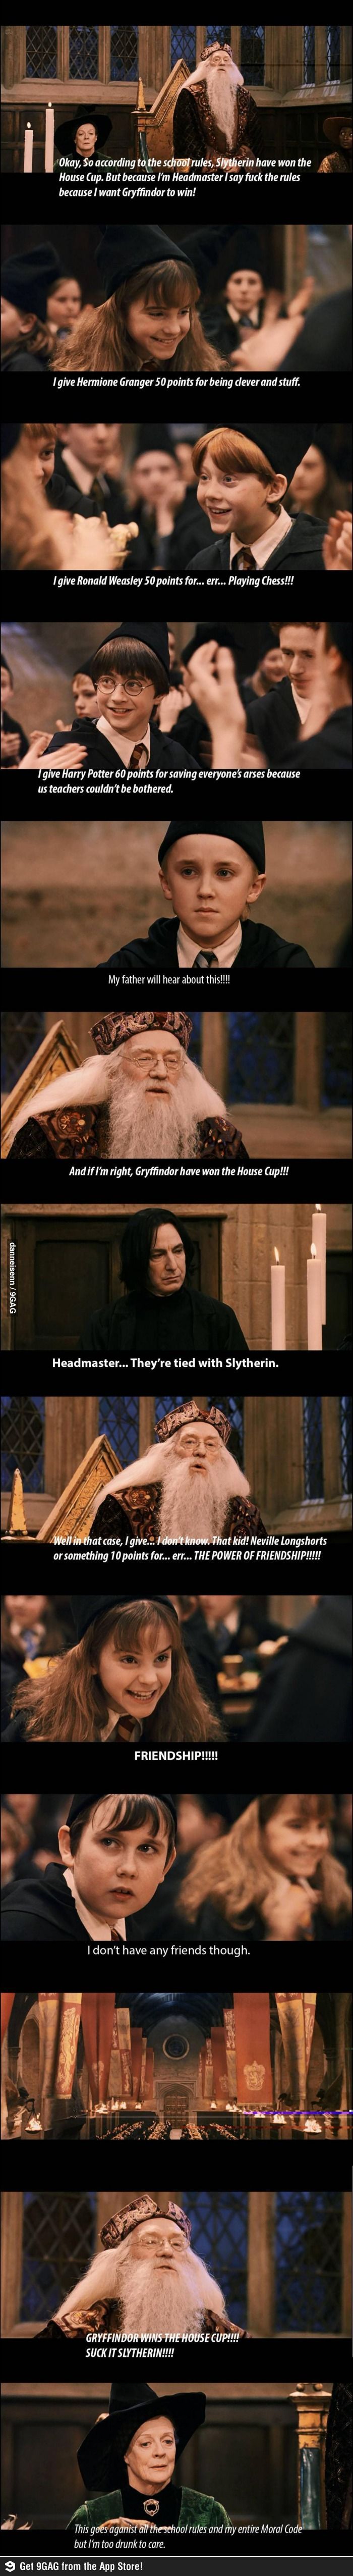 Dumbledore: Screwing Slytherin since 1997